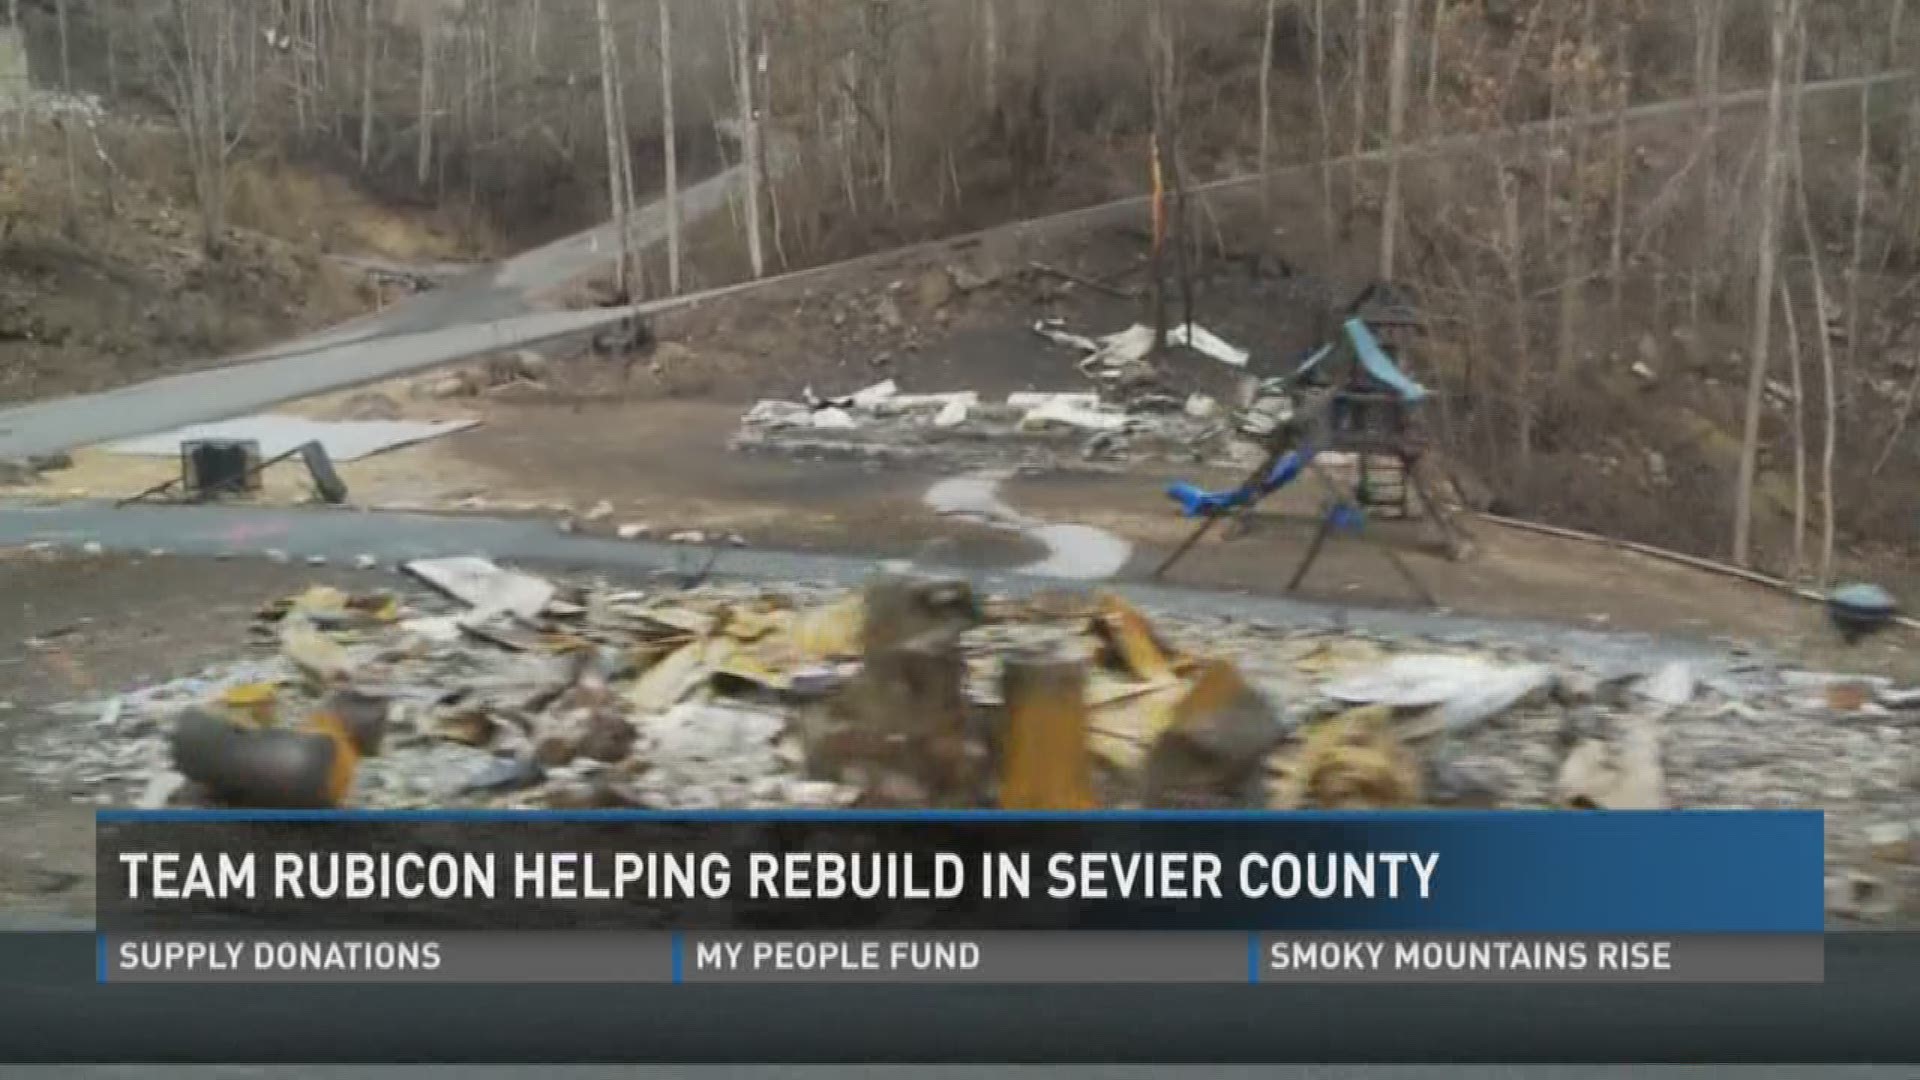 Dec. 9, 2016: A special group of veterans dedicated to service are on the ground in Sevier County to help the fire victims rebuild what they lost.